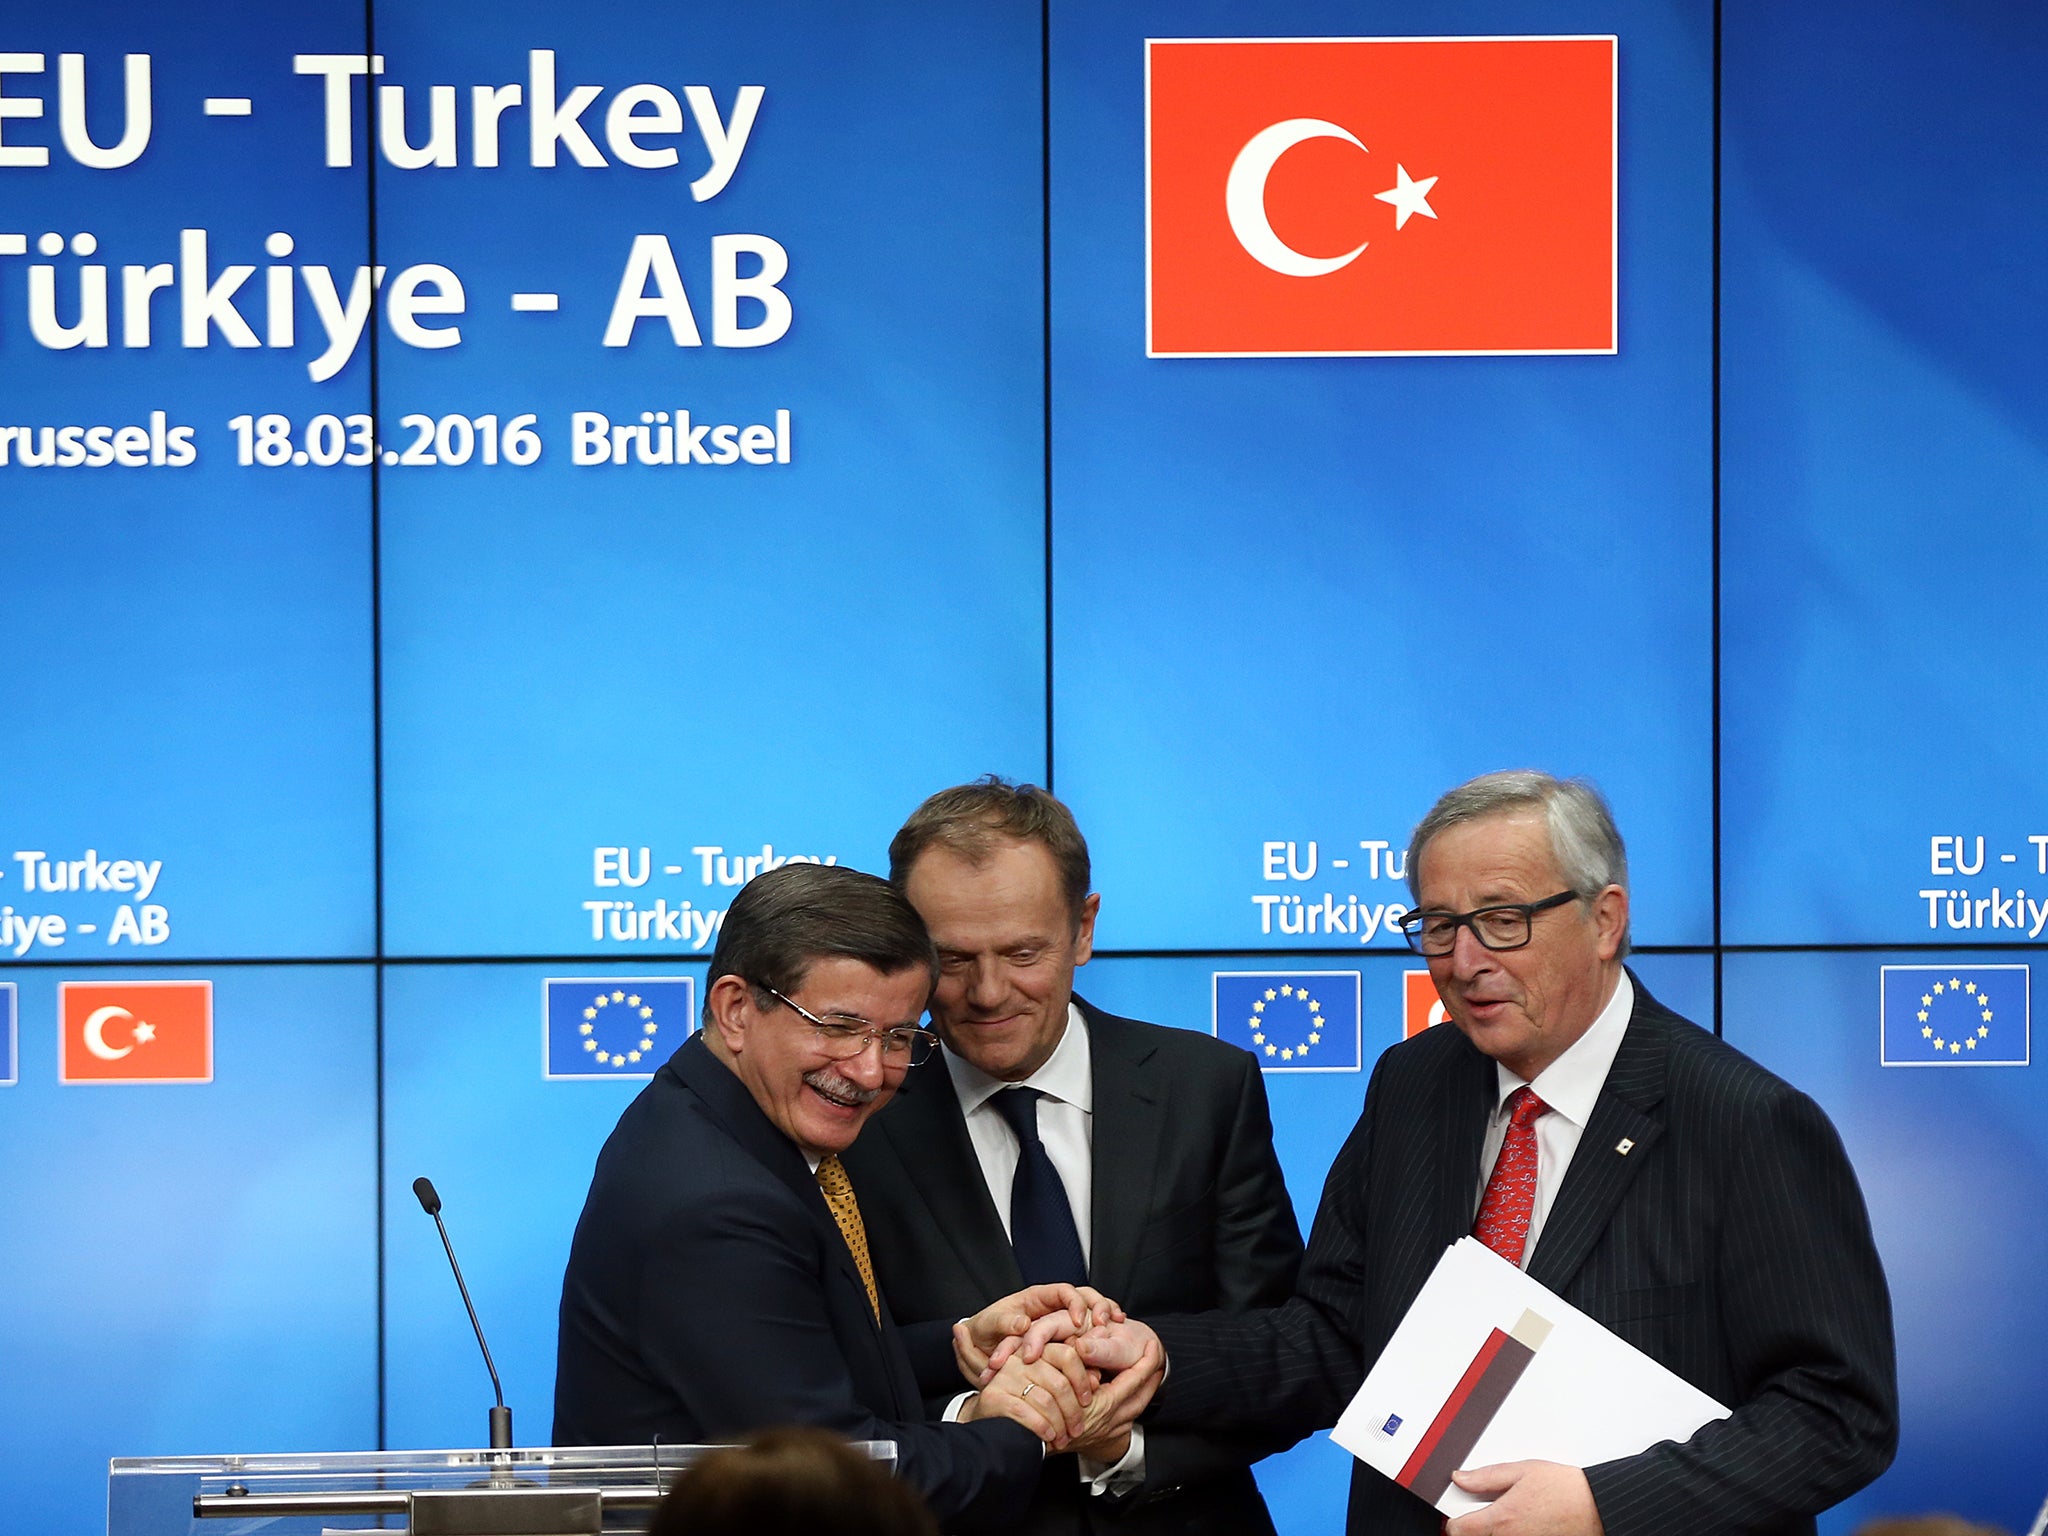 Turkey's Prime Minister, Ahmet Davutoglu shakes hands with President of the European Council, Donald Tusk and President of the European Commission, Jean-Claude Juncker, after a press conference to discuss the migrant deal reached between Turkey and EU states